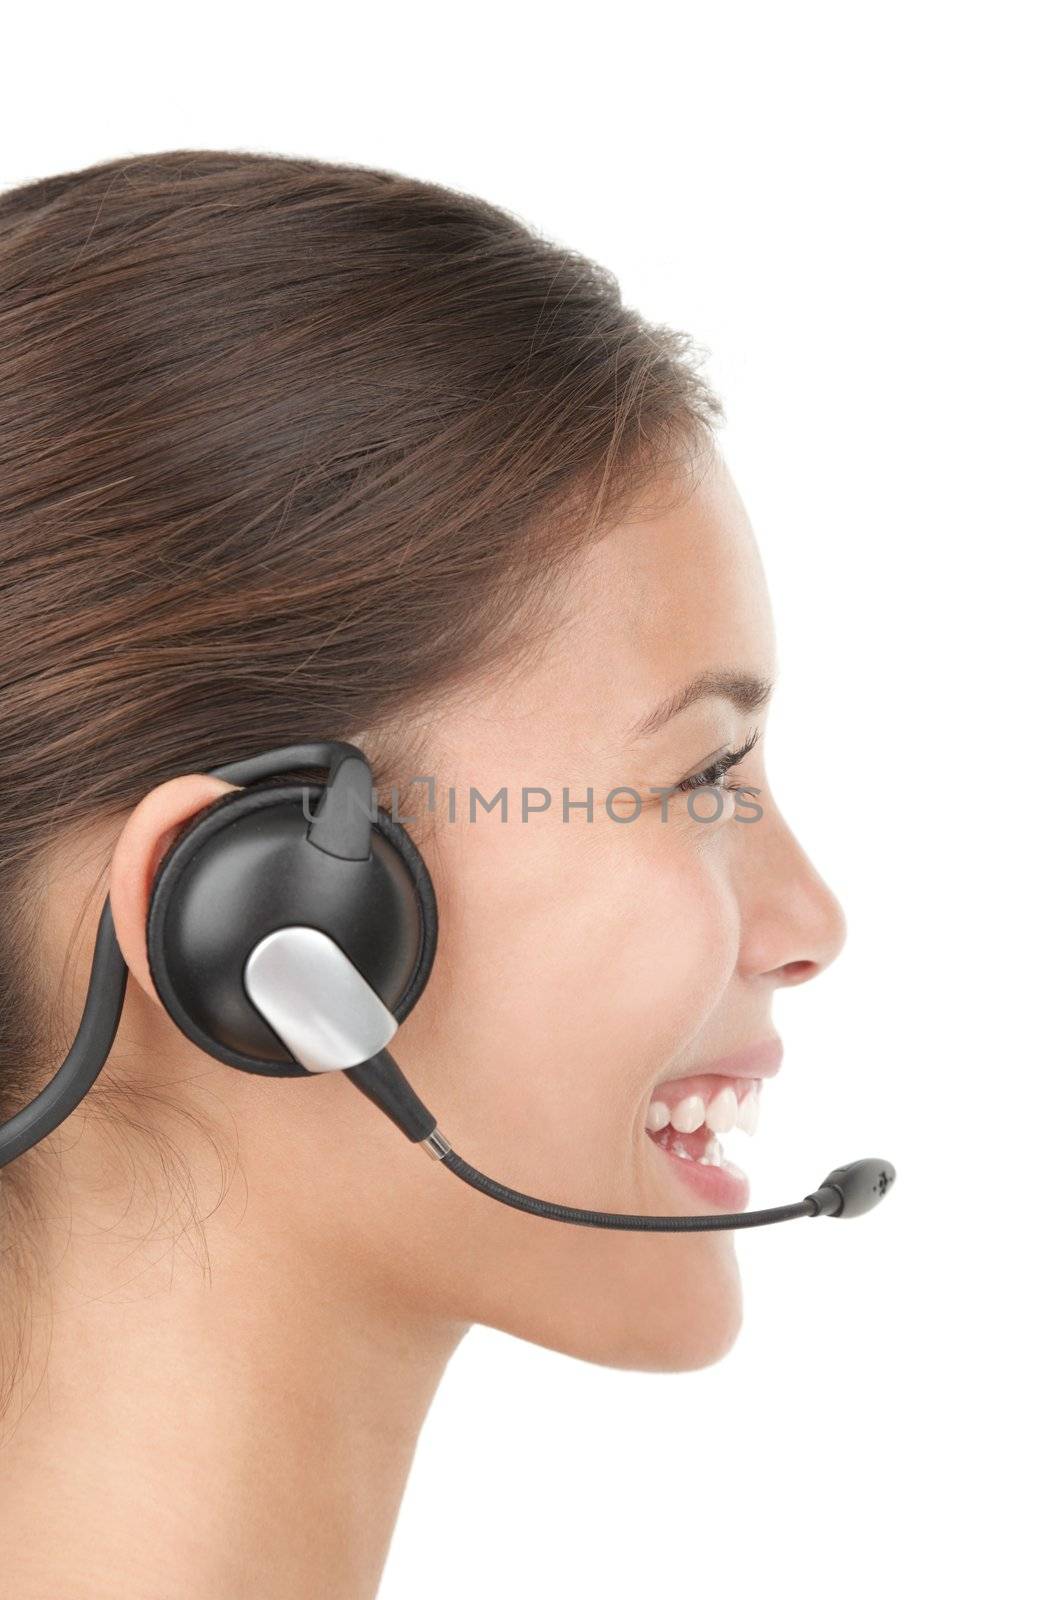 Headset woman in profile - smiling very kindly. Closeup of beautiful young mixed race chinese / caucasian secretary / assistant speaking with headphones while working in call center. Isolated on seamless white background.